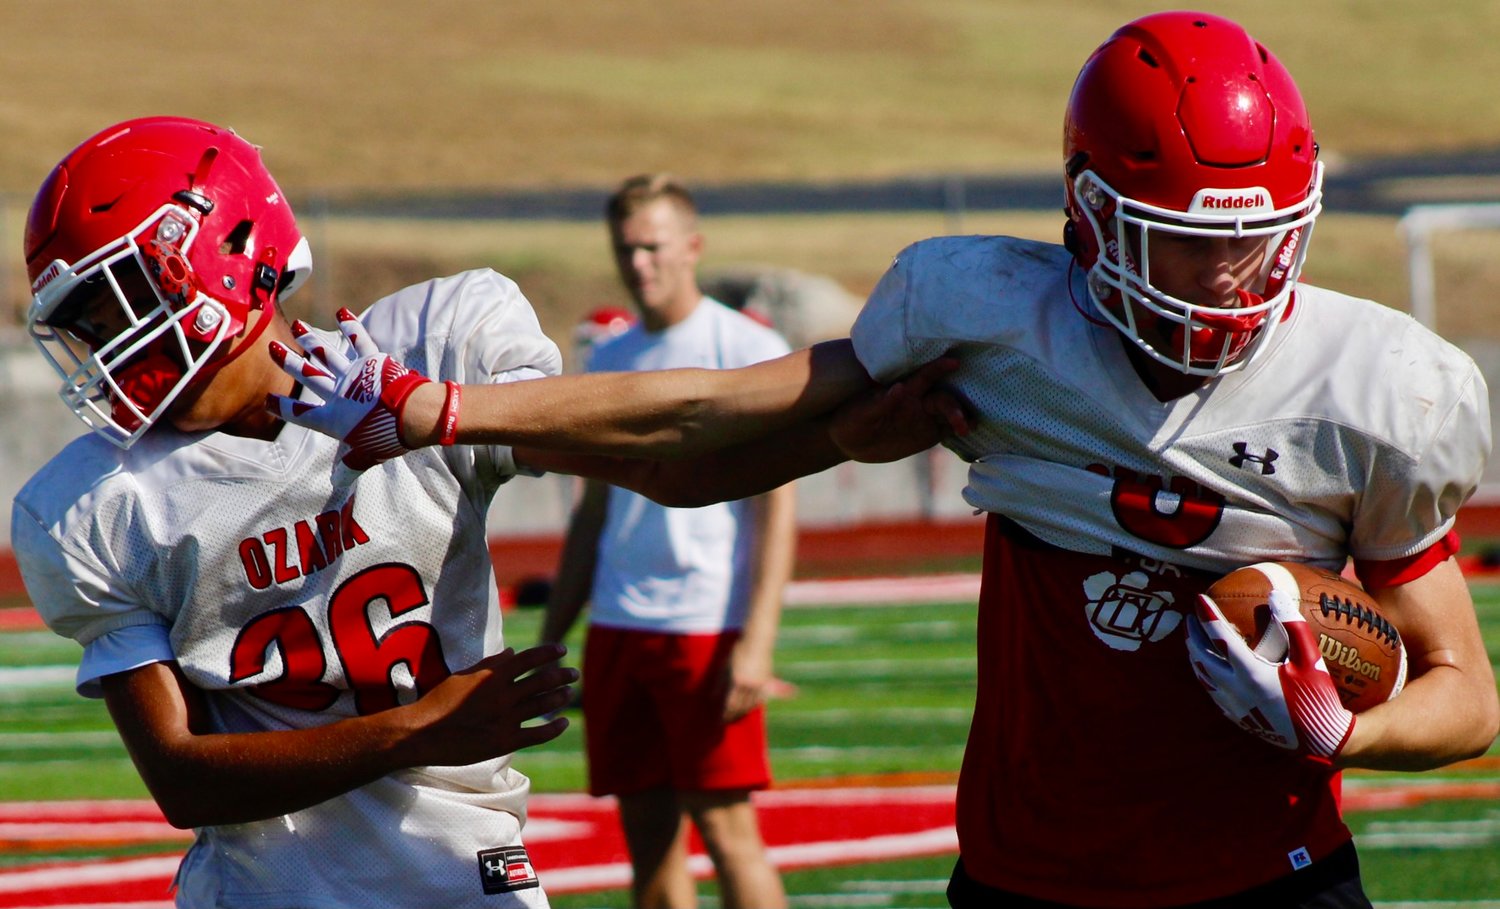 OZARK’S JACE WHATLEY collected 21 catches for 458 yards last season.